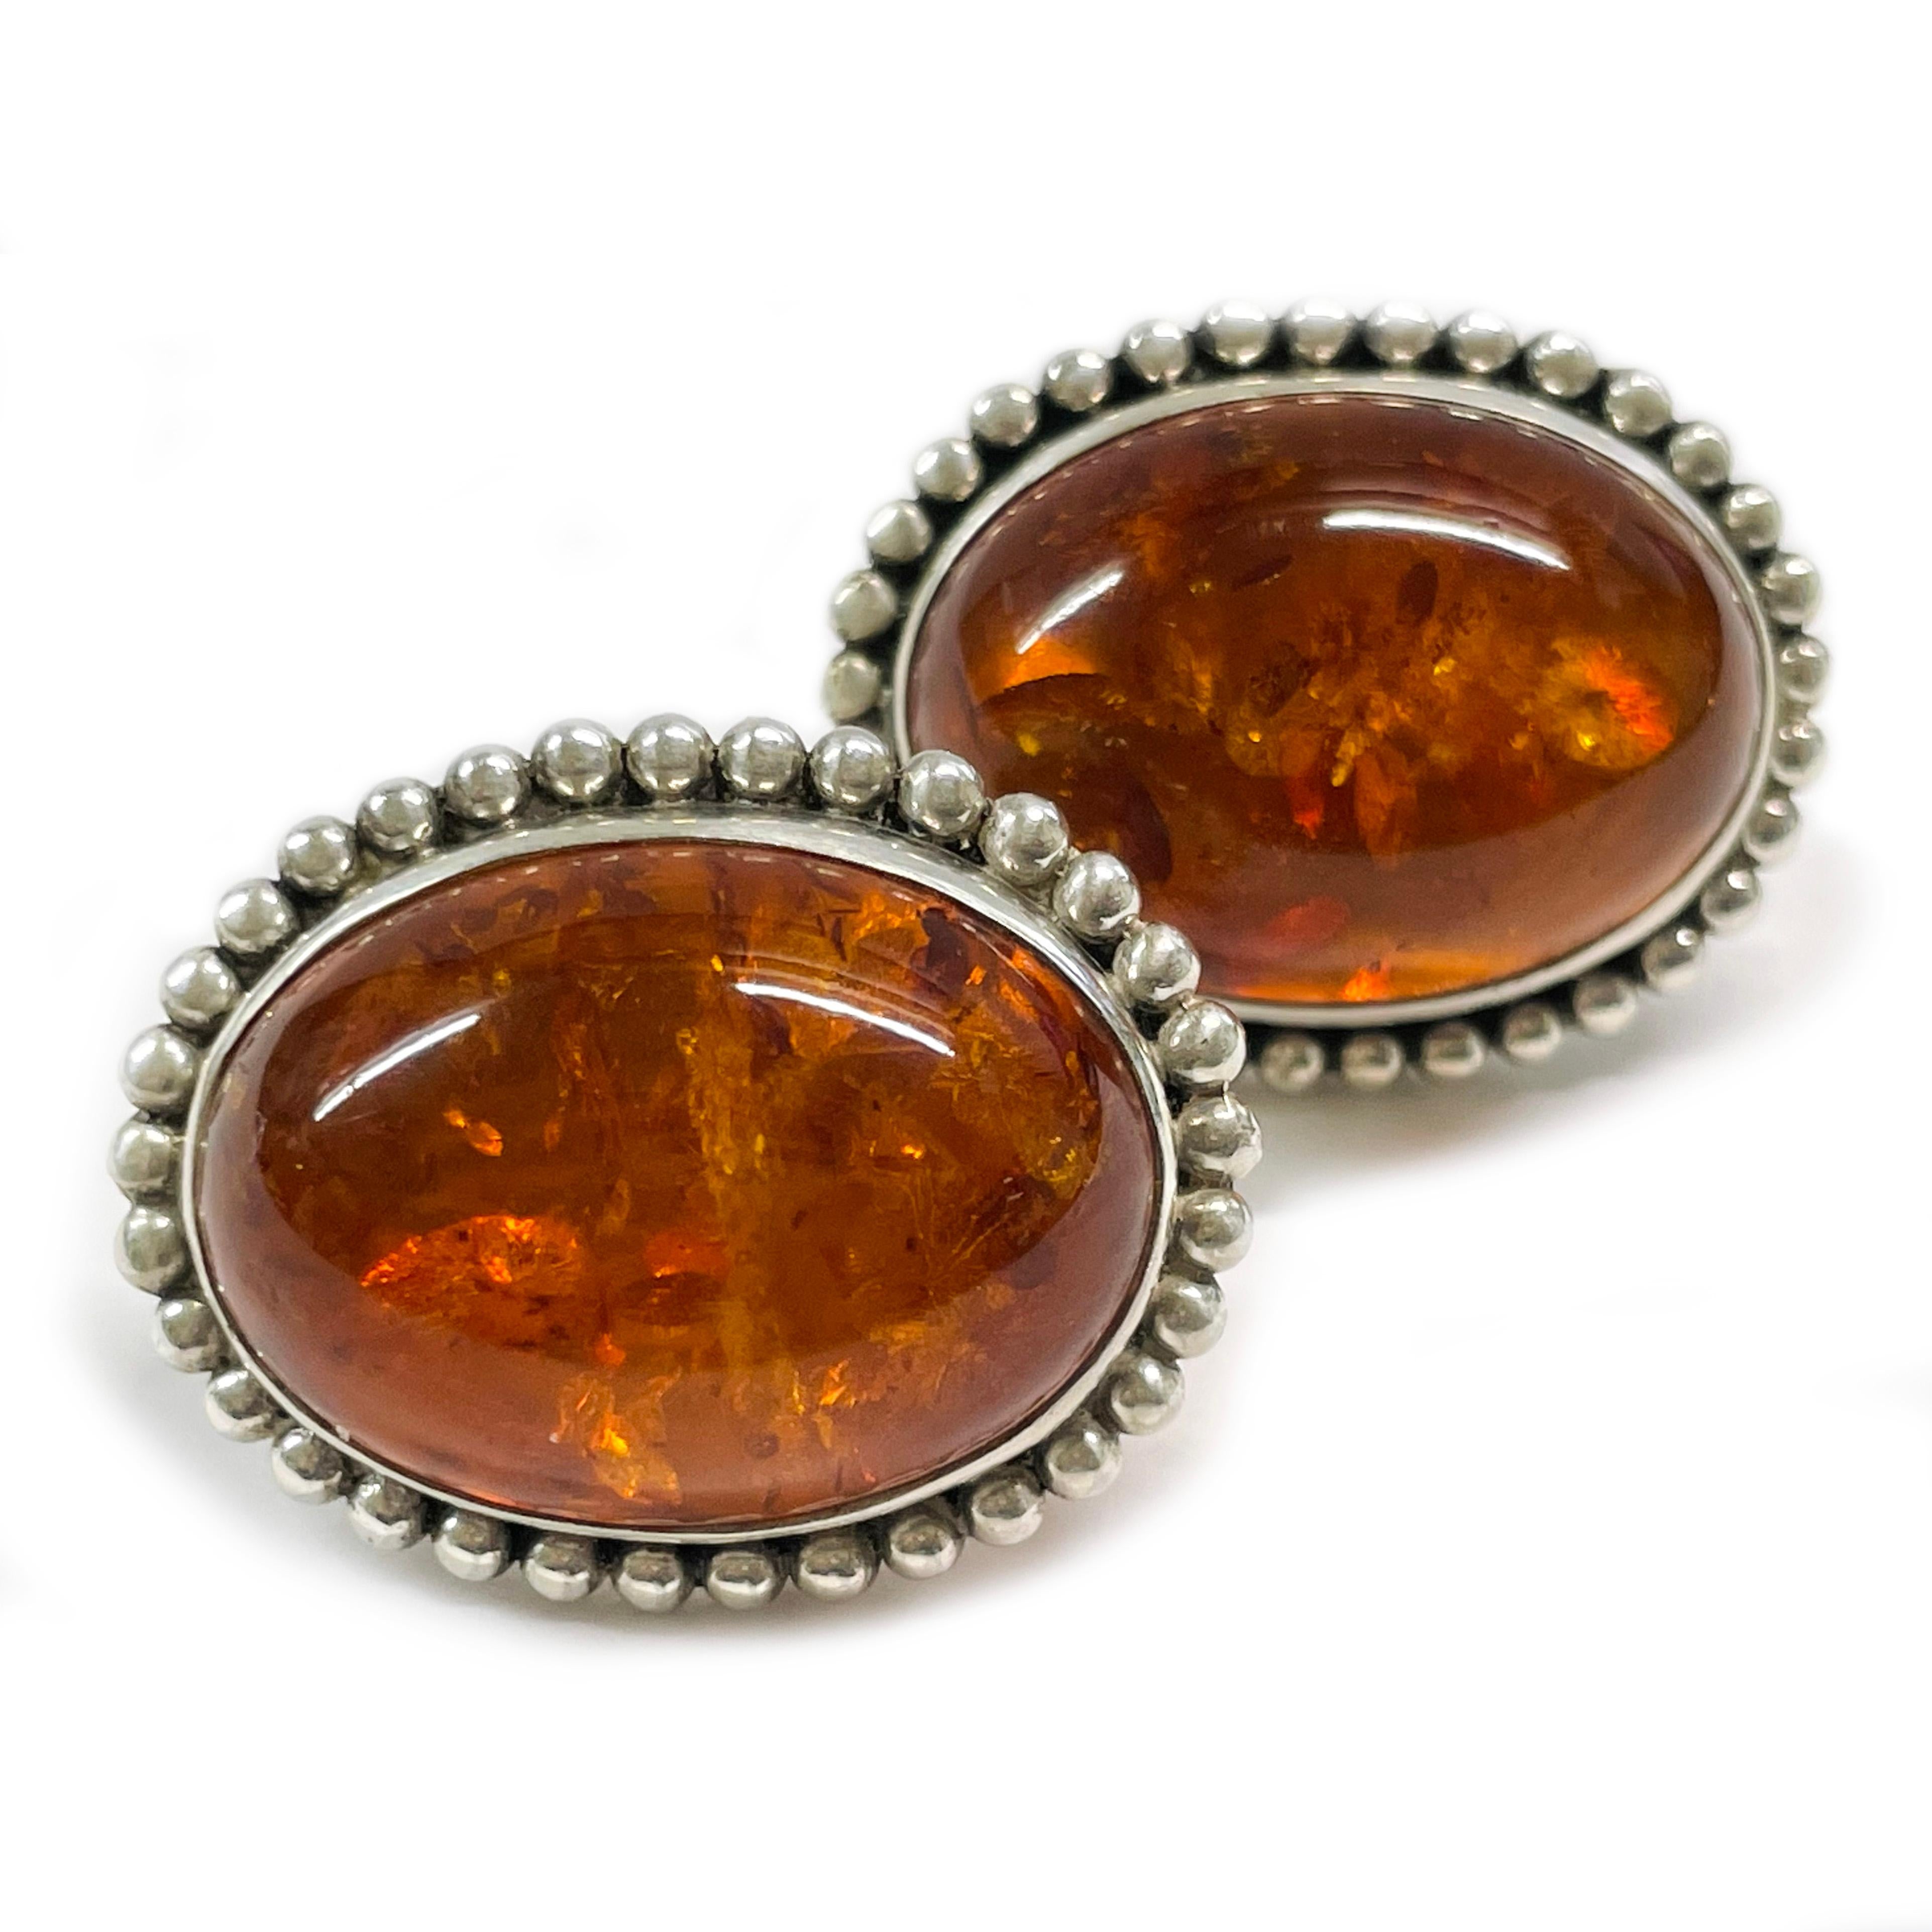 Stephen Dweck Sterling Silver Baltic Amber Earrings. The large oval Baltic Amber cabochon is bezel-set with a beaded surround. The Amber cabochon measures approximately 25 x 18mm. The earrings measure approximately 30.7mm in height x 24.2mm in width